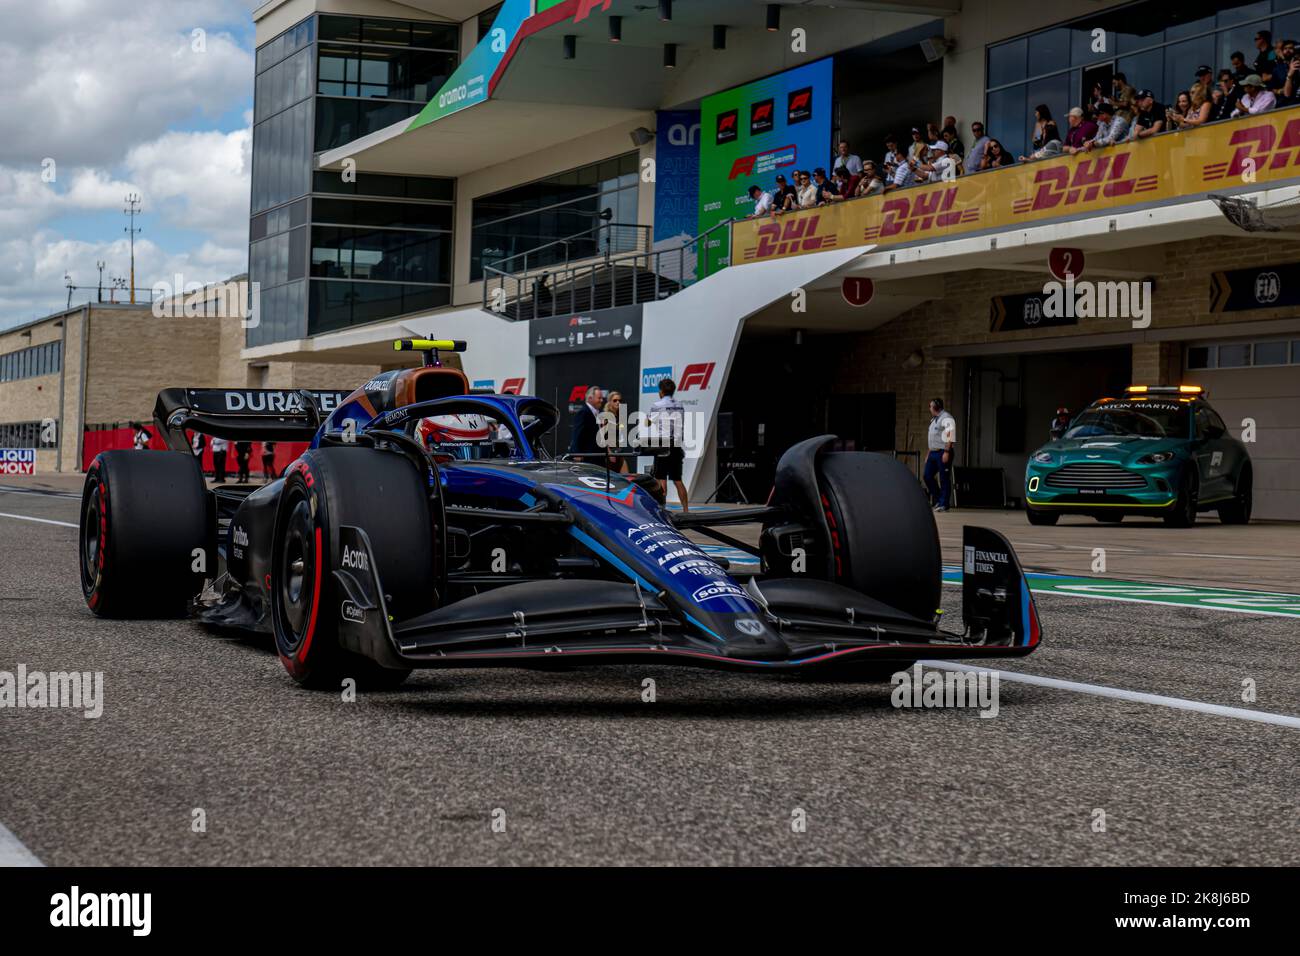 Austin, Texas, United States, 24th Oct 2022, Nicholas Latifi, from Canada competes for Williams Racing. Race day, round 19 of the 2022 Formula 1 championship. Credit: Michael Potts/Alamy Live News Stock Photo